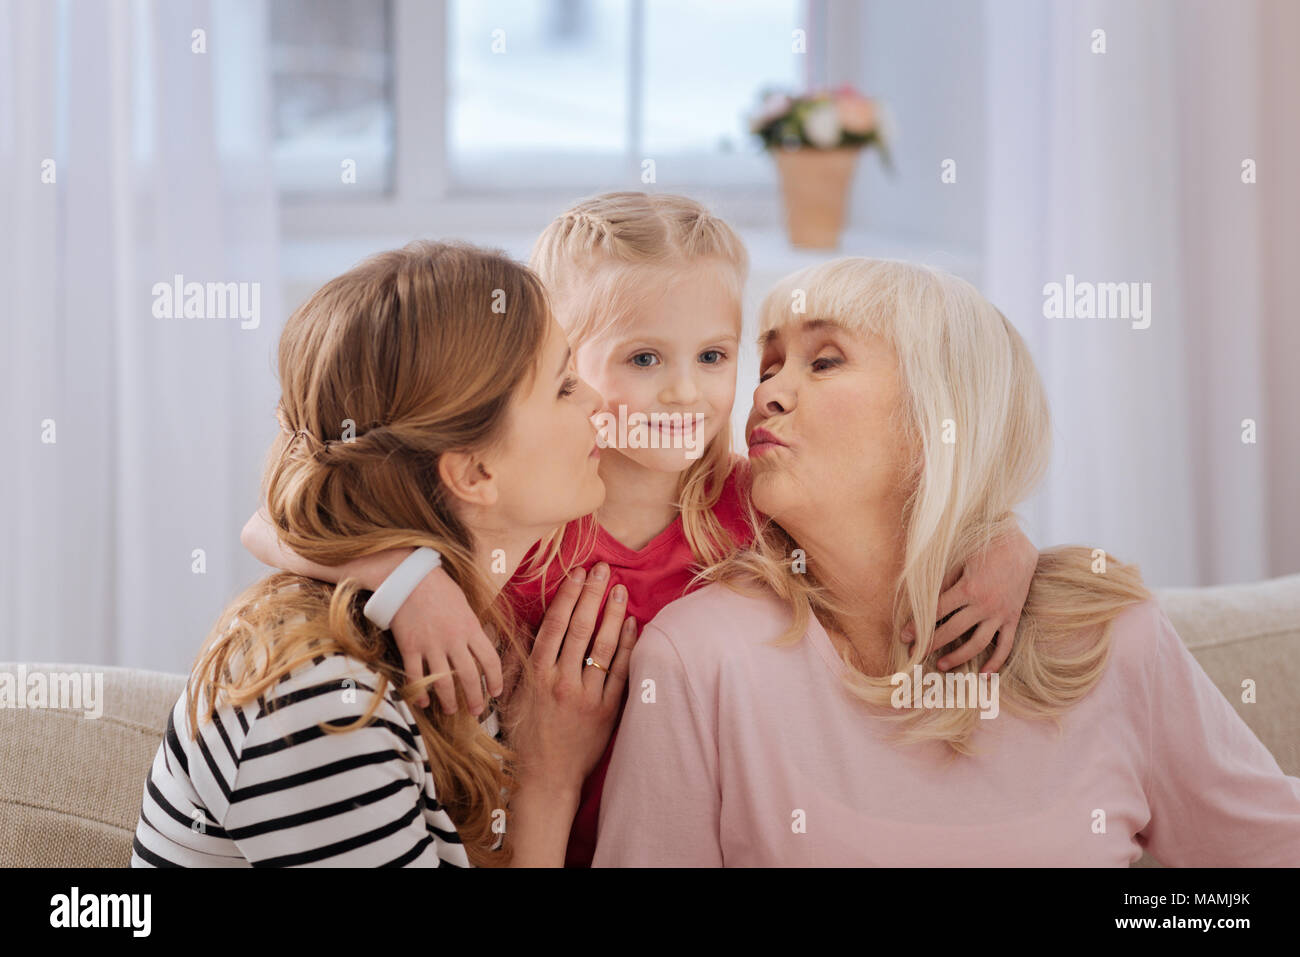 Nice pretty girl being kissed Stock Photo